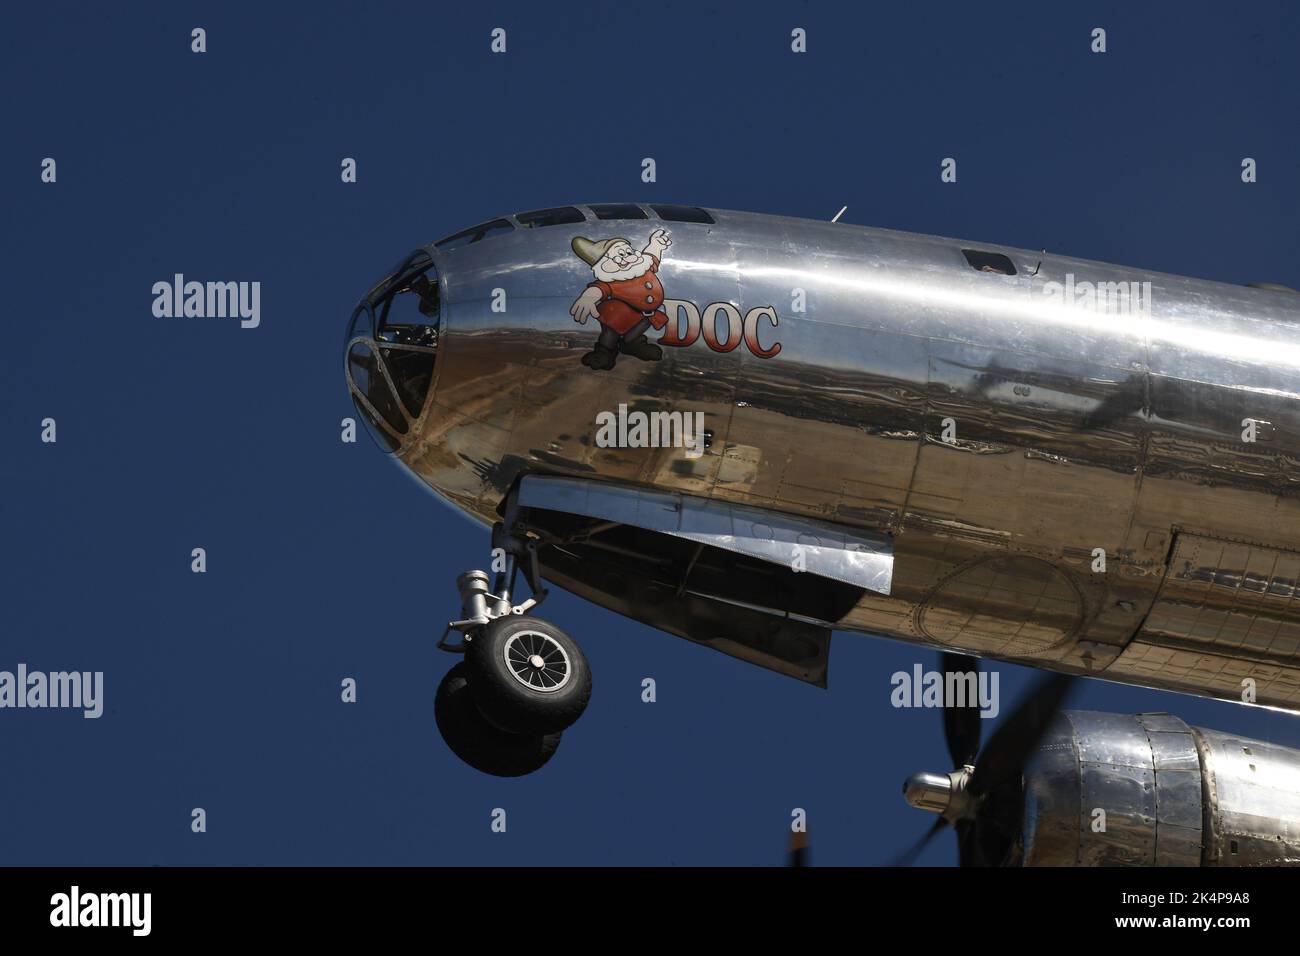 Boeing B-29 'Doc' at Brown Field in San Diego, California Stock Photo